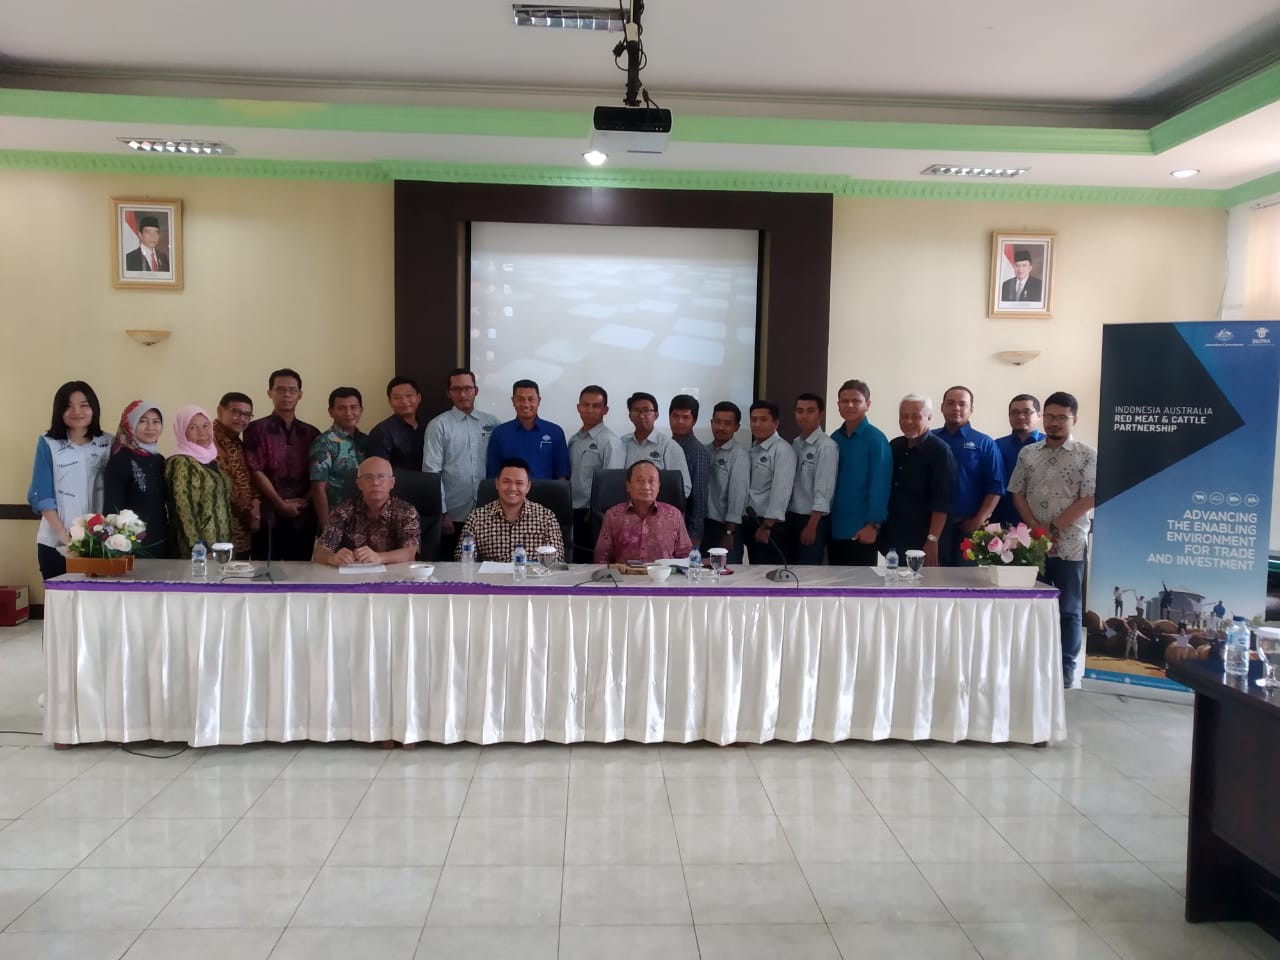 Participants of the assessment for Breeding Manager Competency Certification taking picture with the assessors from LSP-PI and representatives of GAPUSPINDO and the Partnership